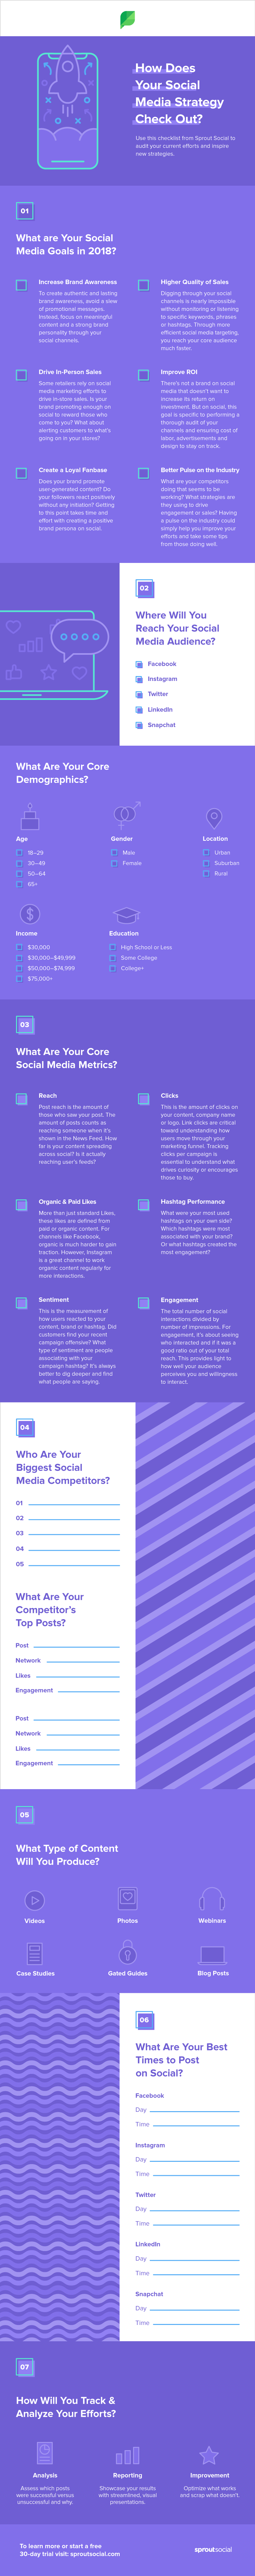 7 Steps in Creating a Winning Social Media Marketing Strategy in 2018 - #infographic